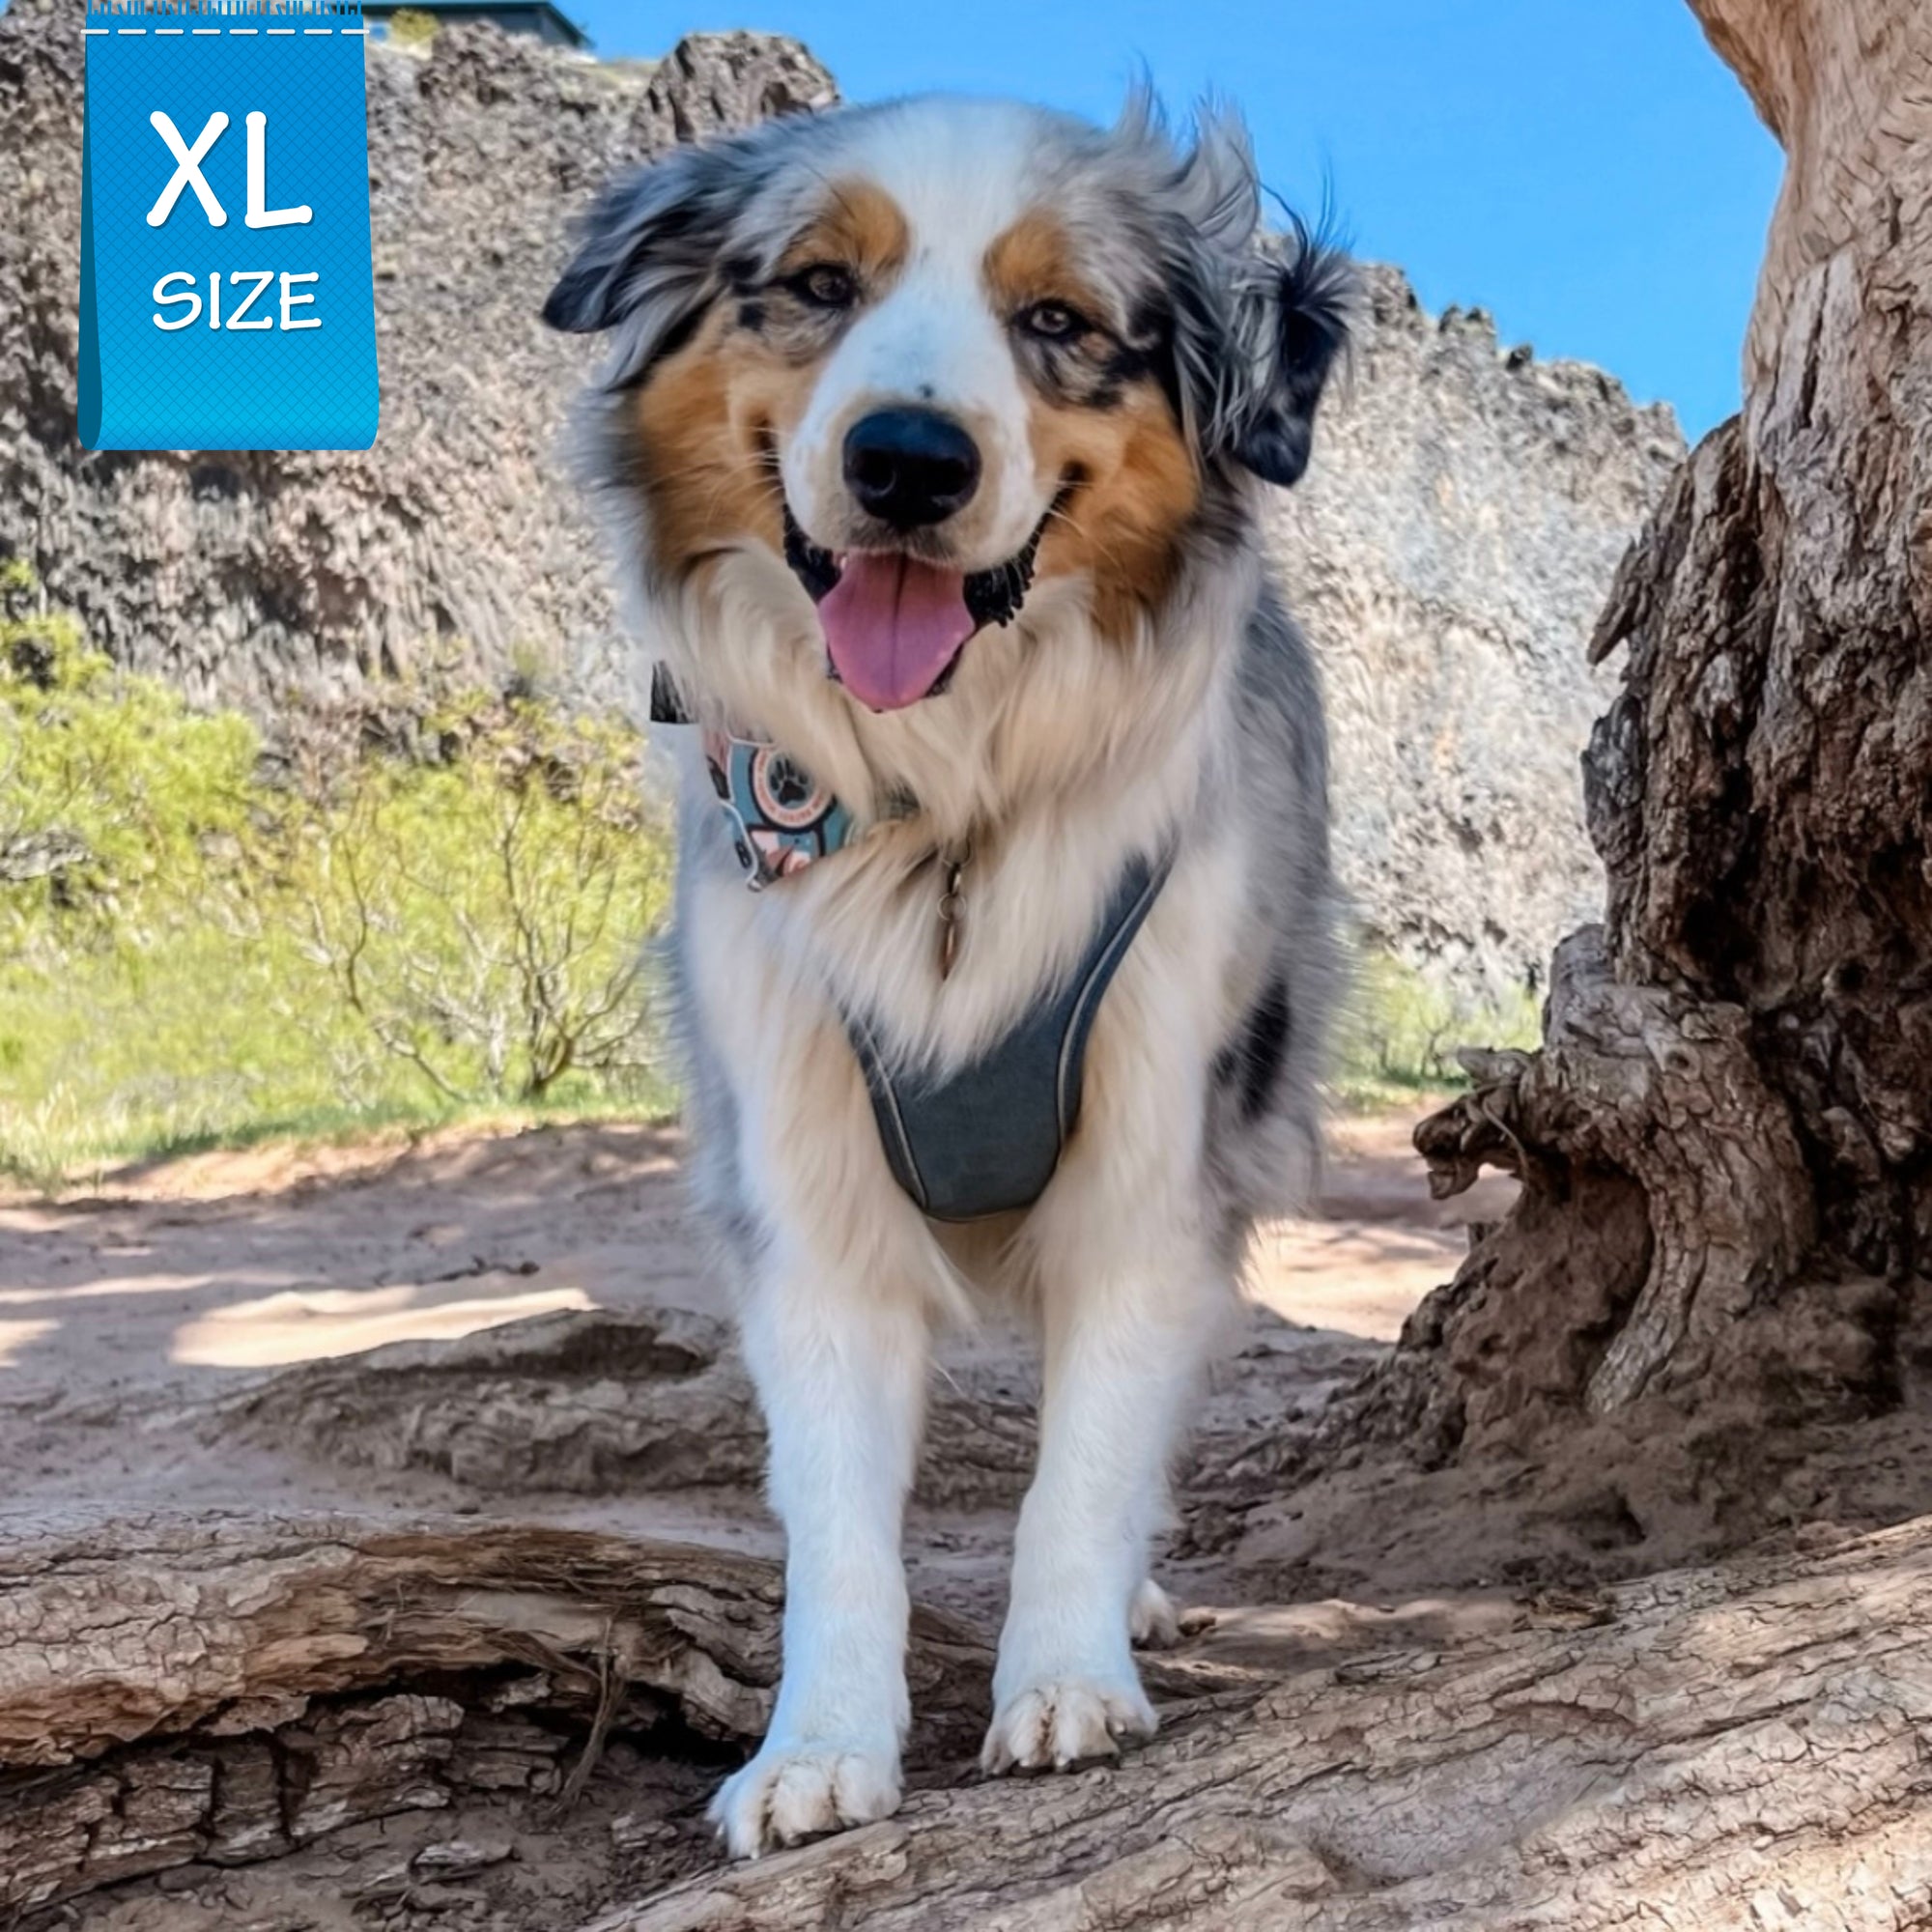 Denim Dog Harness - Reflective and No Pull - Australian Shepard wearing Downtown Denim Dog Harness - standing on a rock with cliffs in the background - Wag Trendz